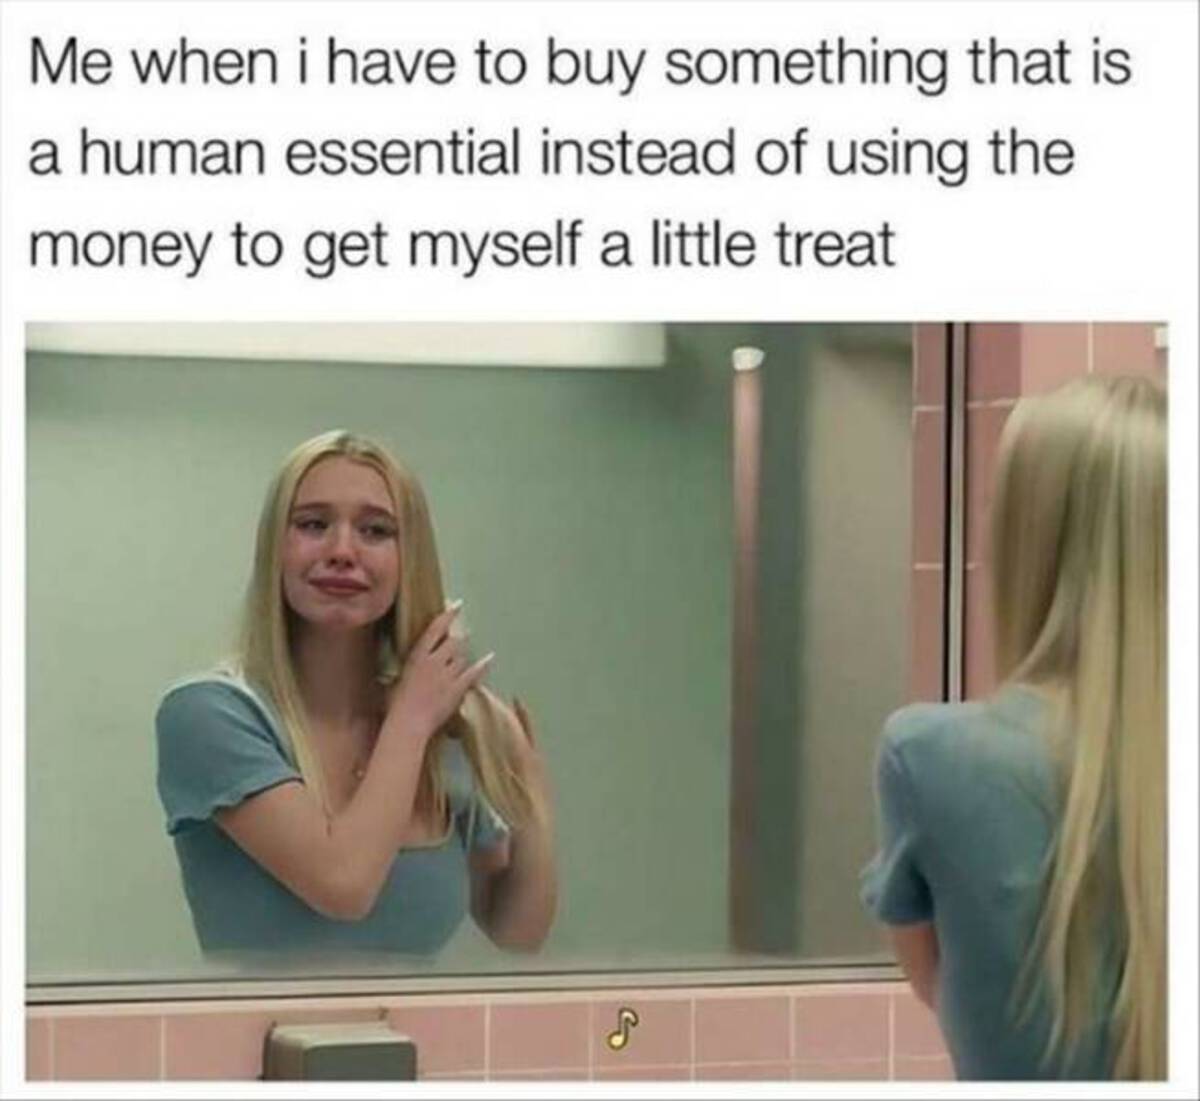 me when i have to buy something - Me when i have to buy something that is a human essential instead of using the money to get myself a little treat